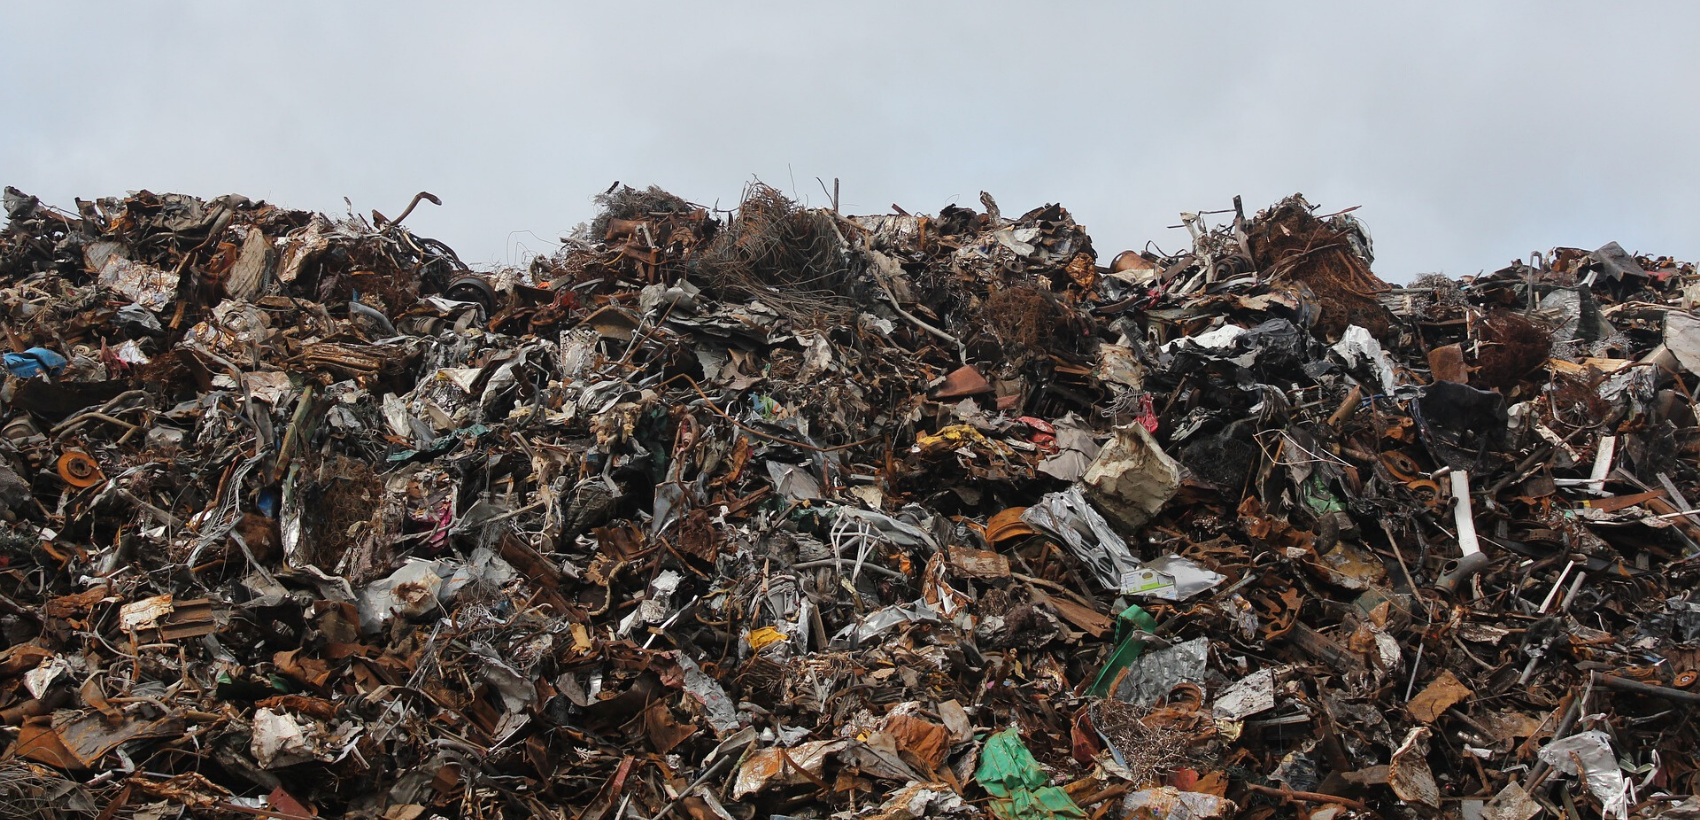 Hyderabad and its scrap waste management problem